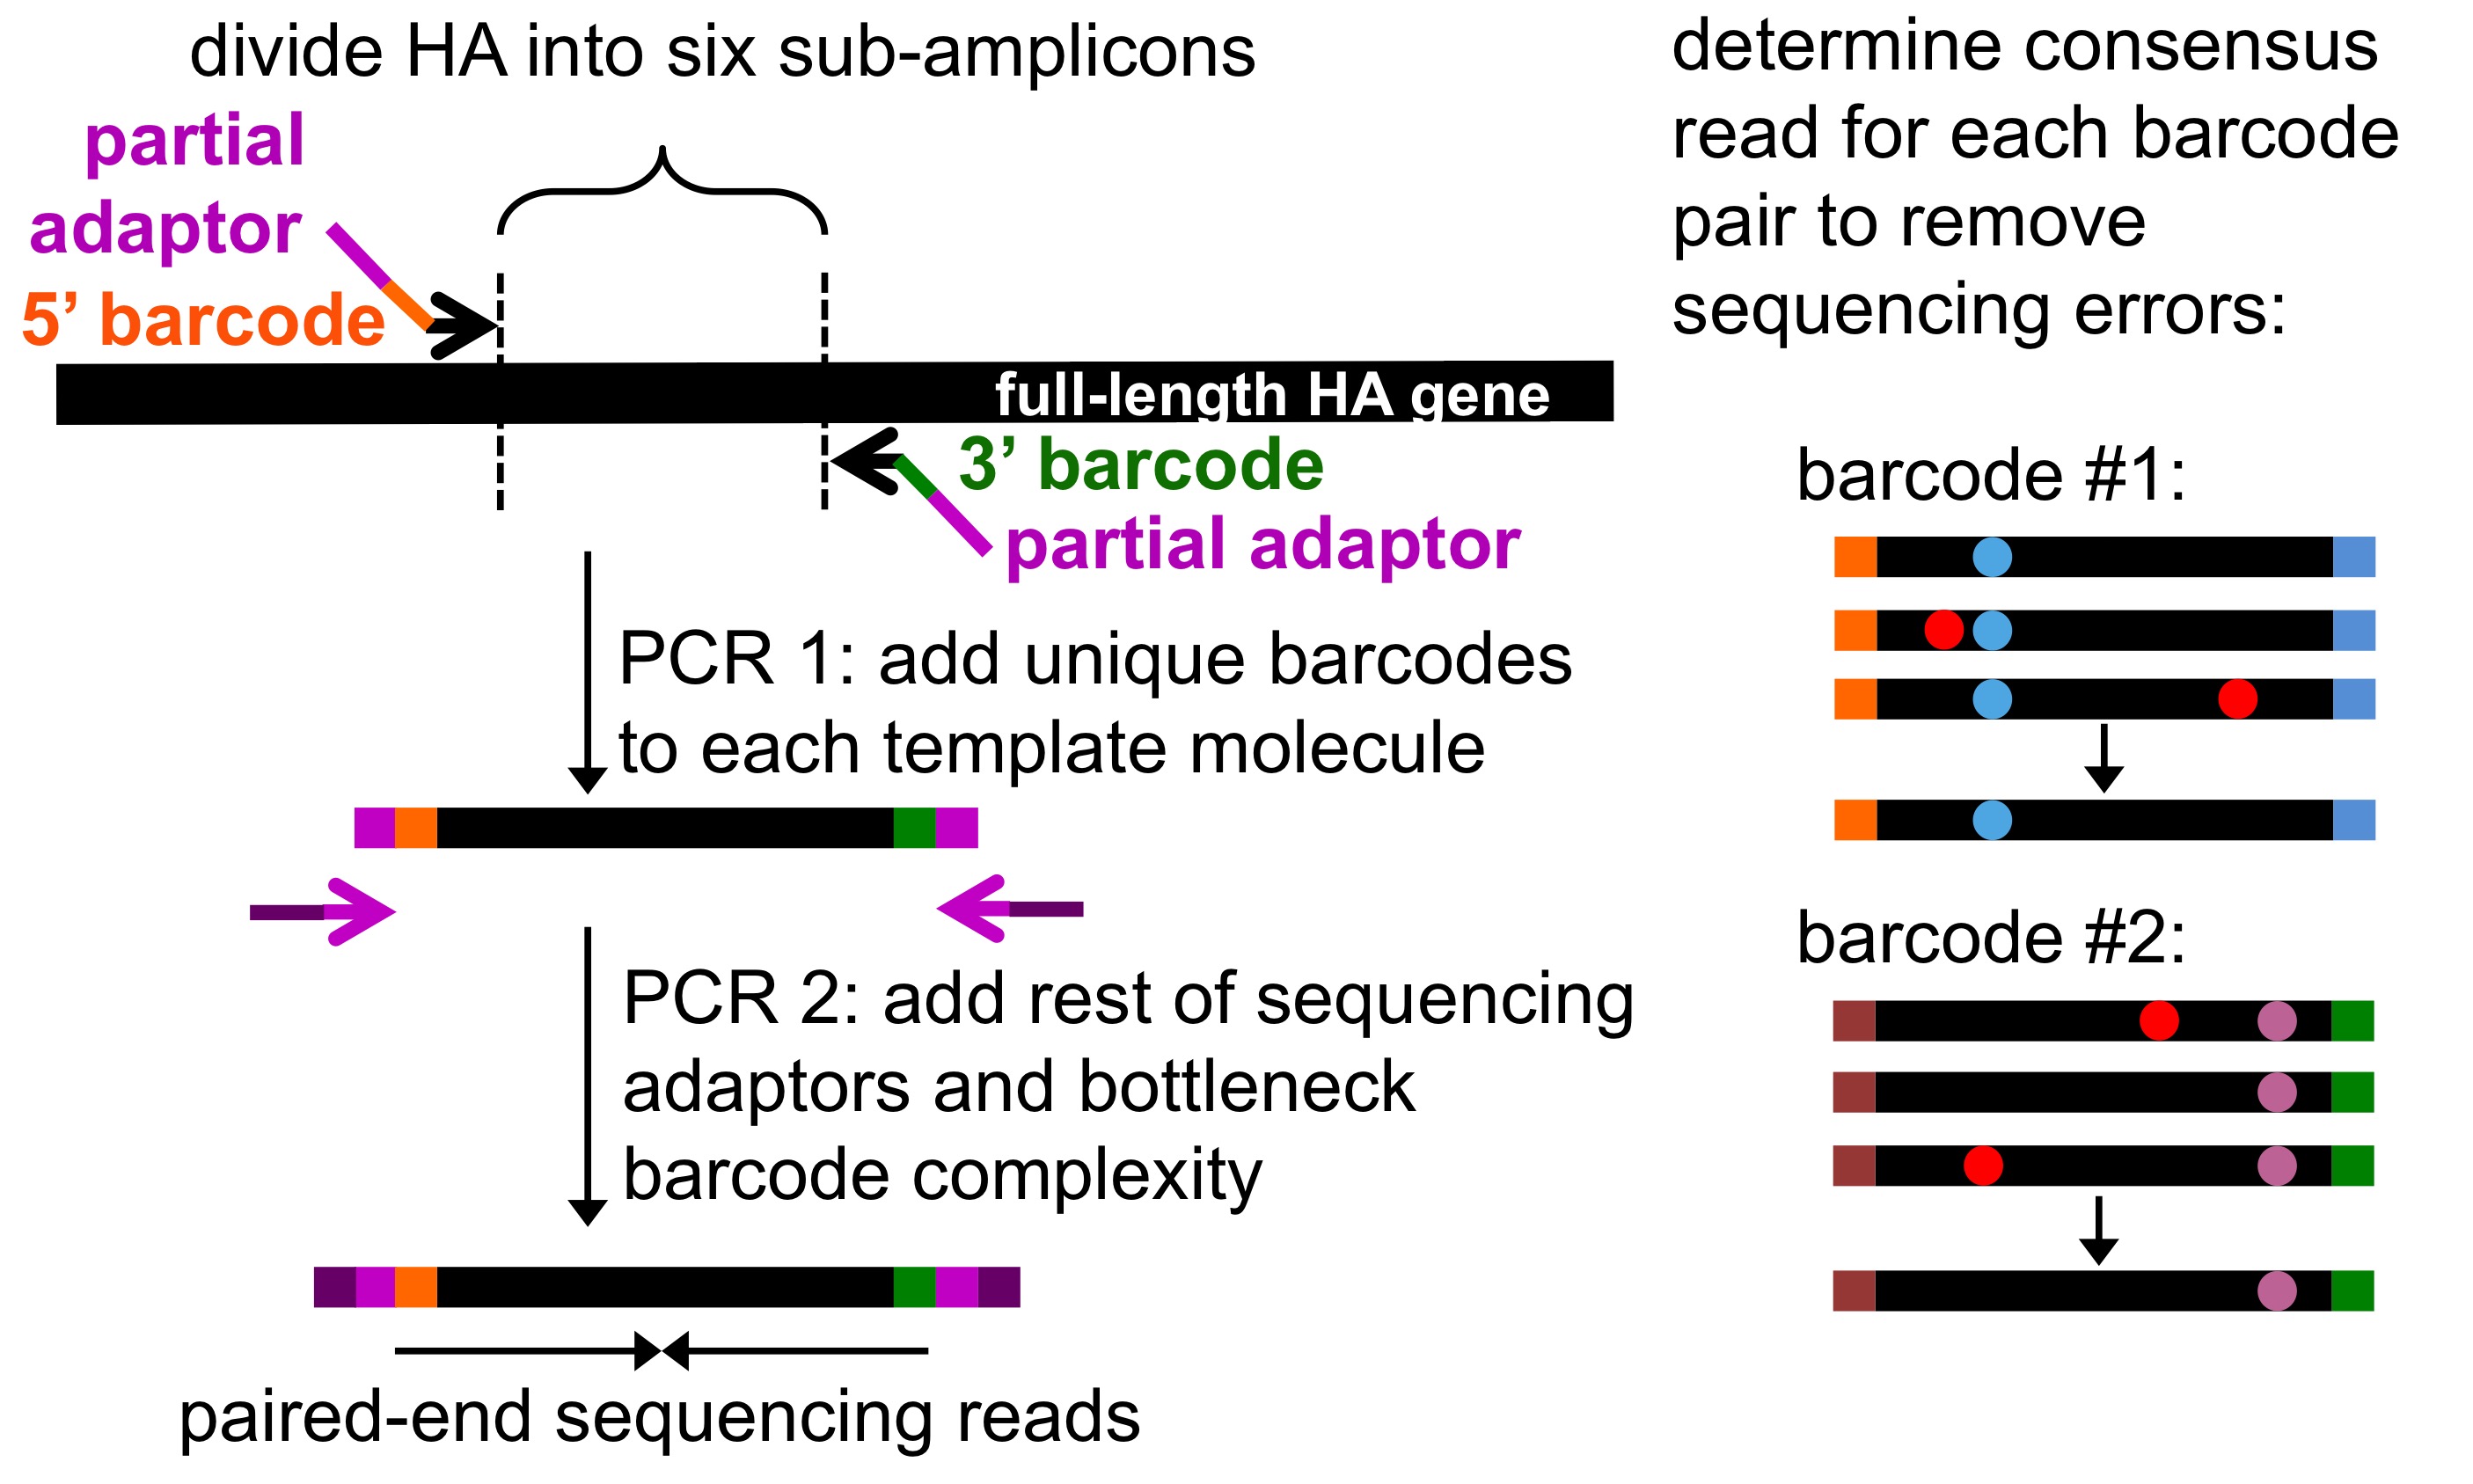 schematic of barcoded subamplicon sequencing, Doud and Bloom 2016